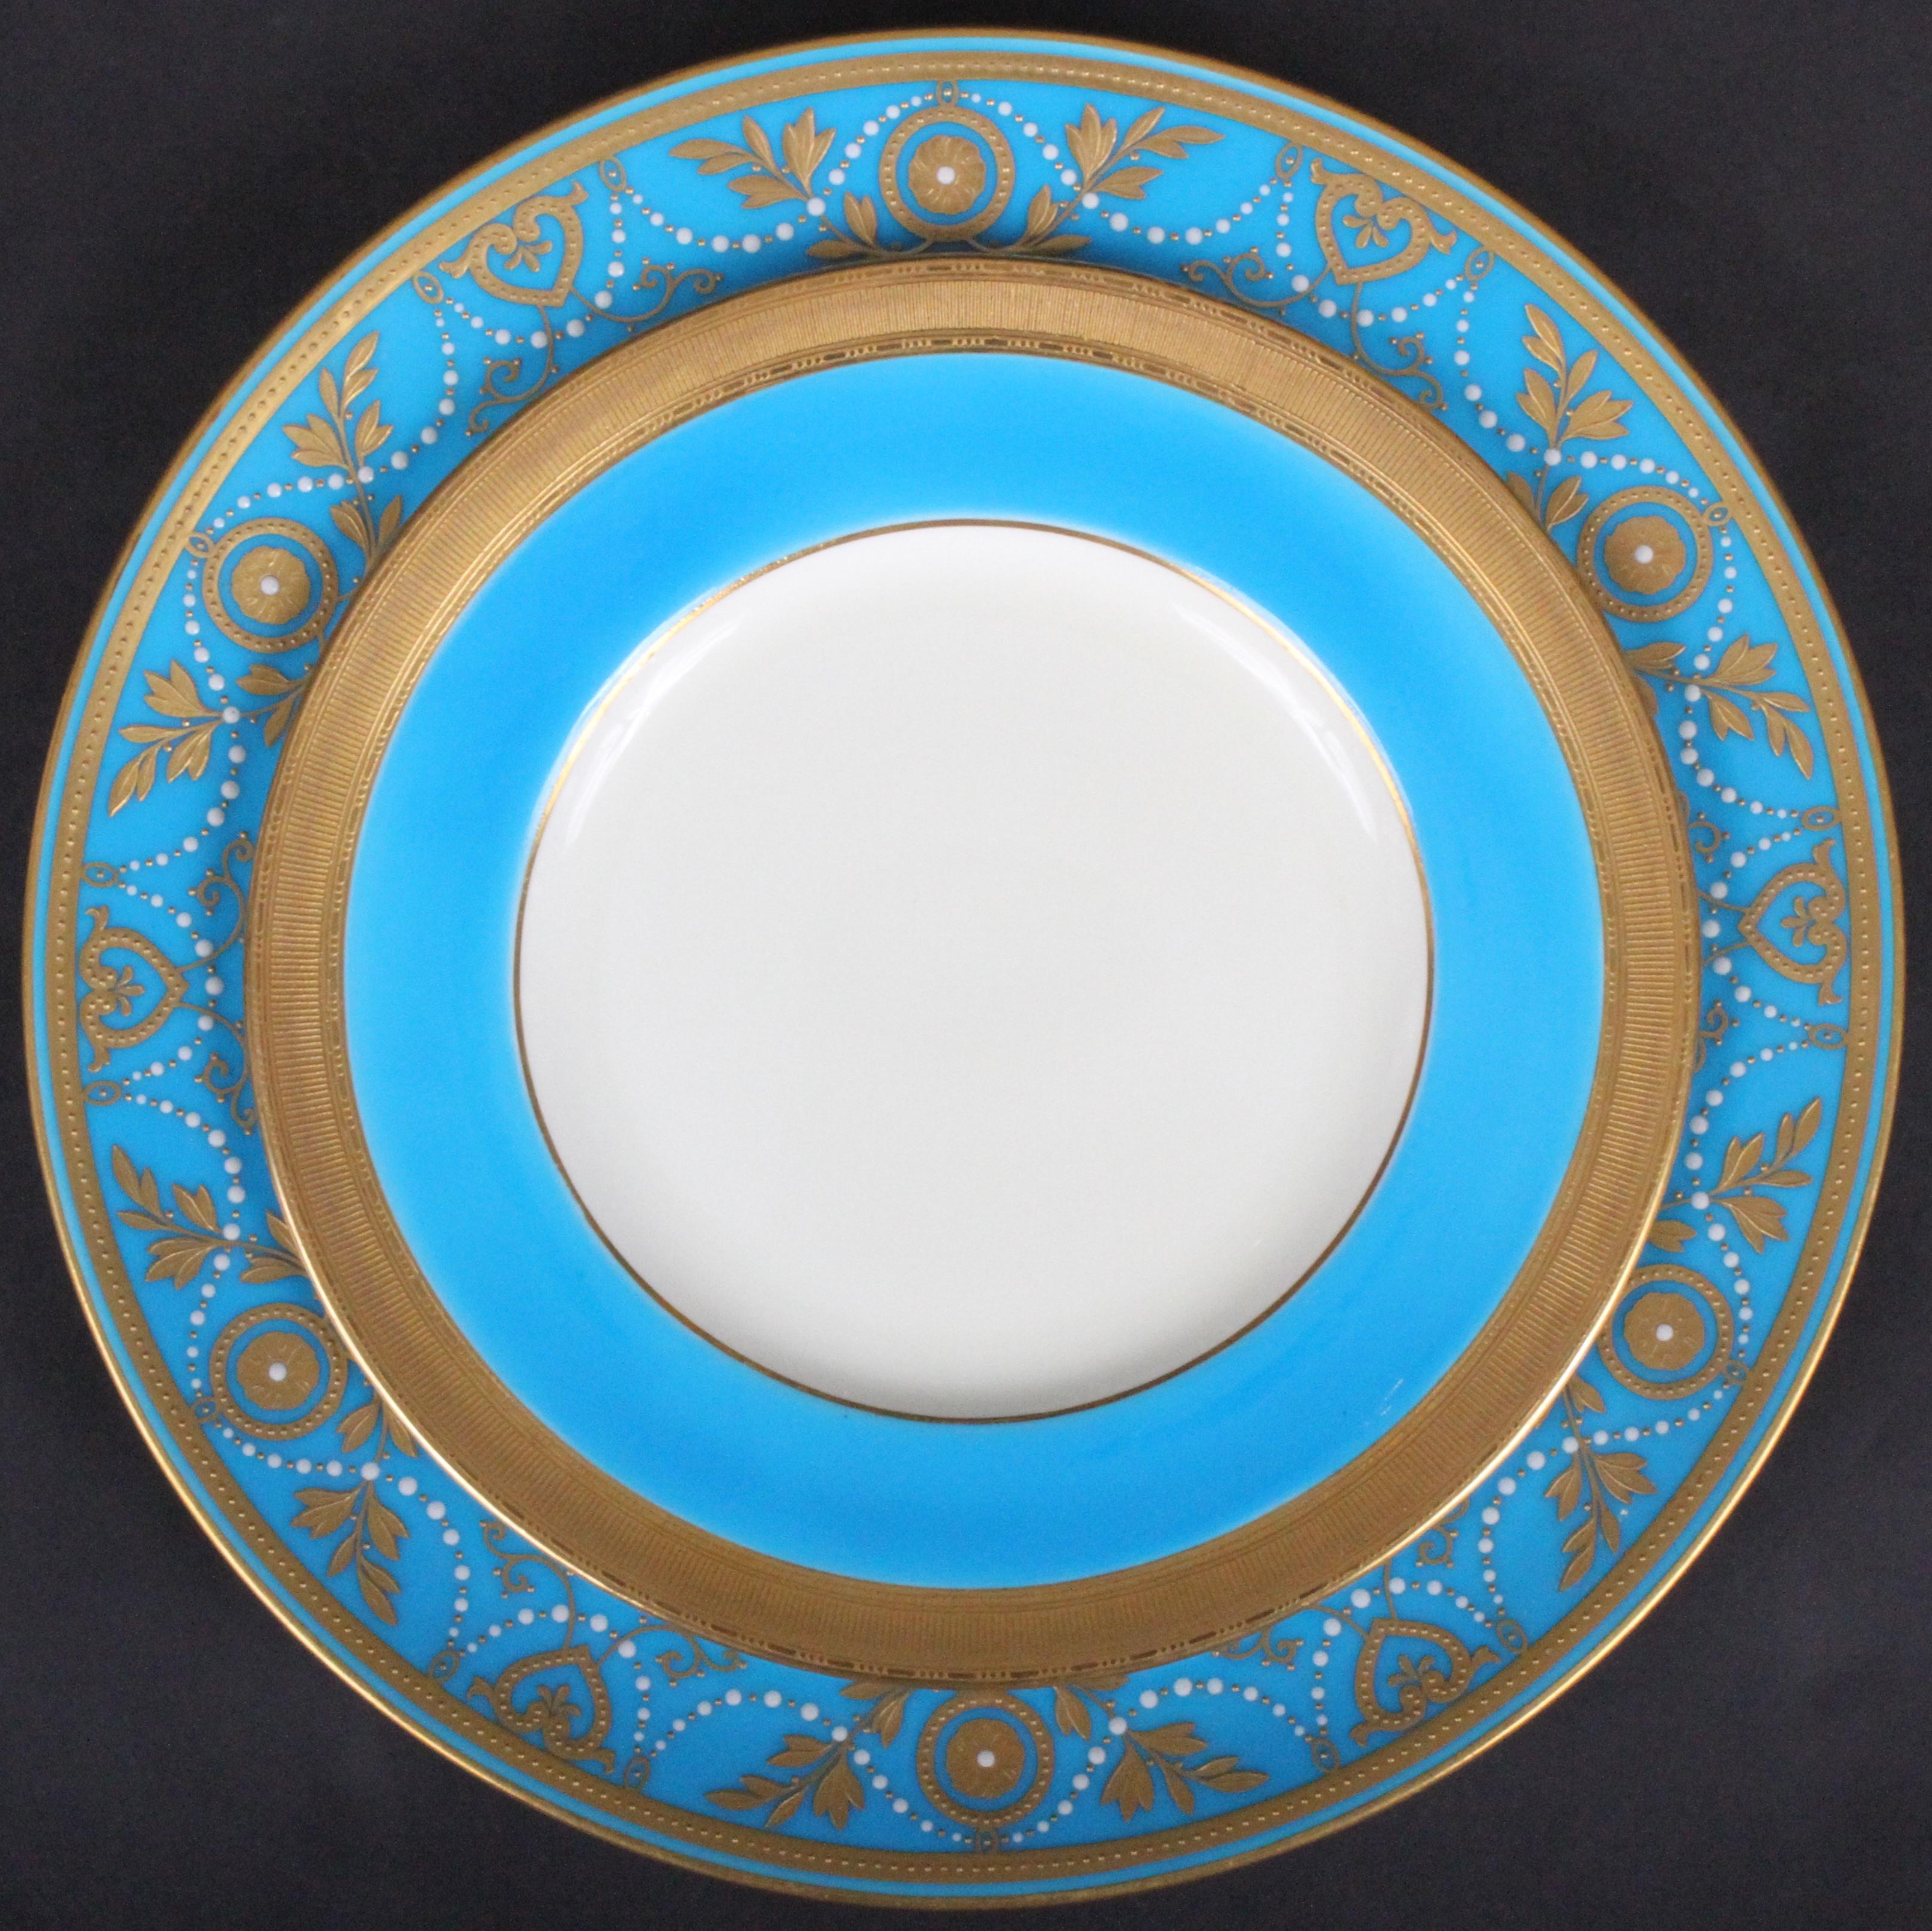 This is a set of 12 monogrammed 22-karat gold encrusted and raised-paste gold turquoise porcelain dinner or service plates, with 12 coordinating turquoise plates. They were made by Minton, Stoke-on-Trent, England. The plates feature Minton’s most